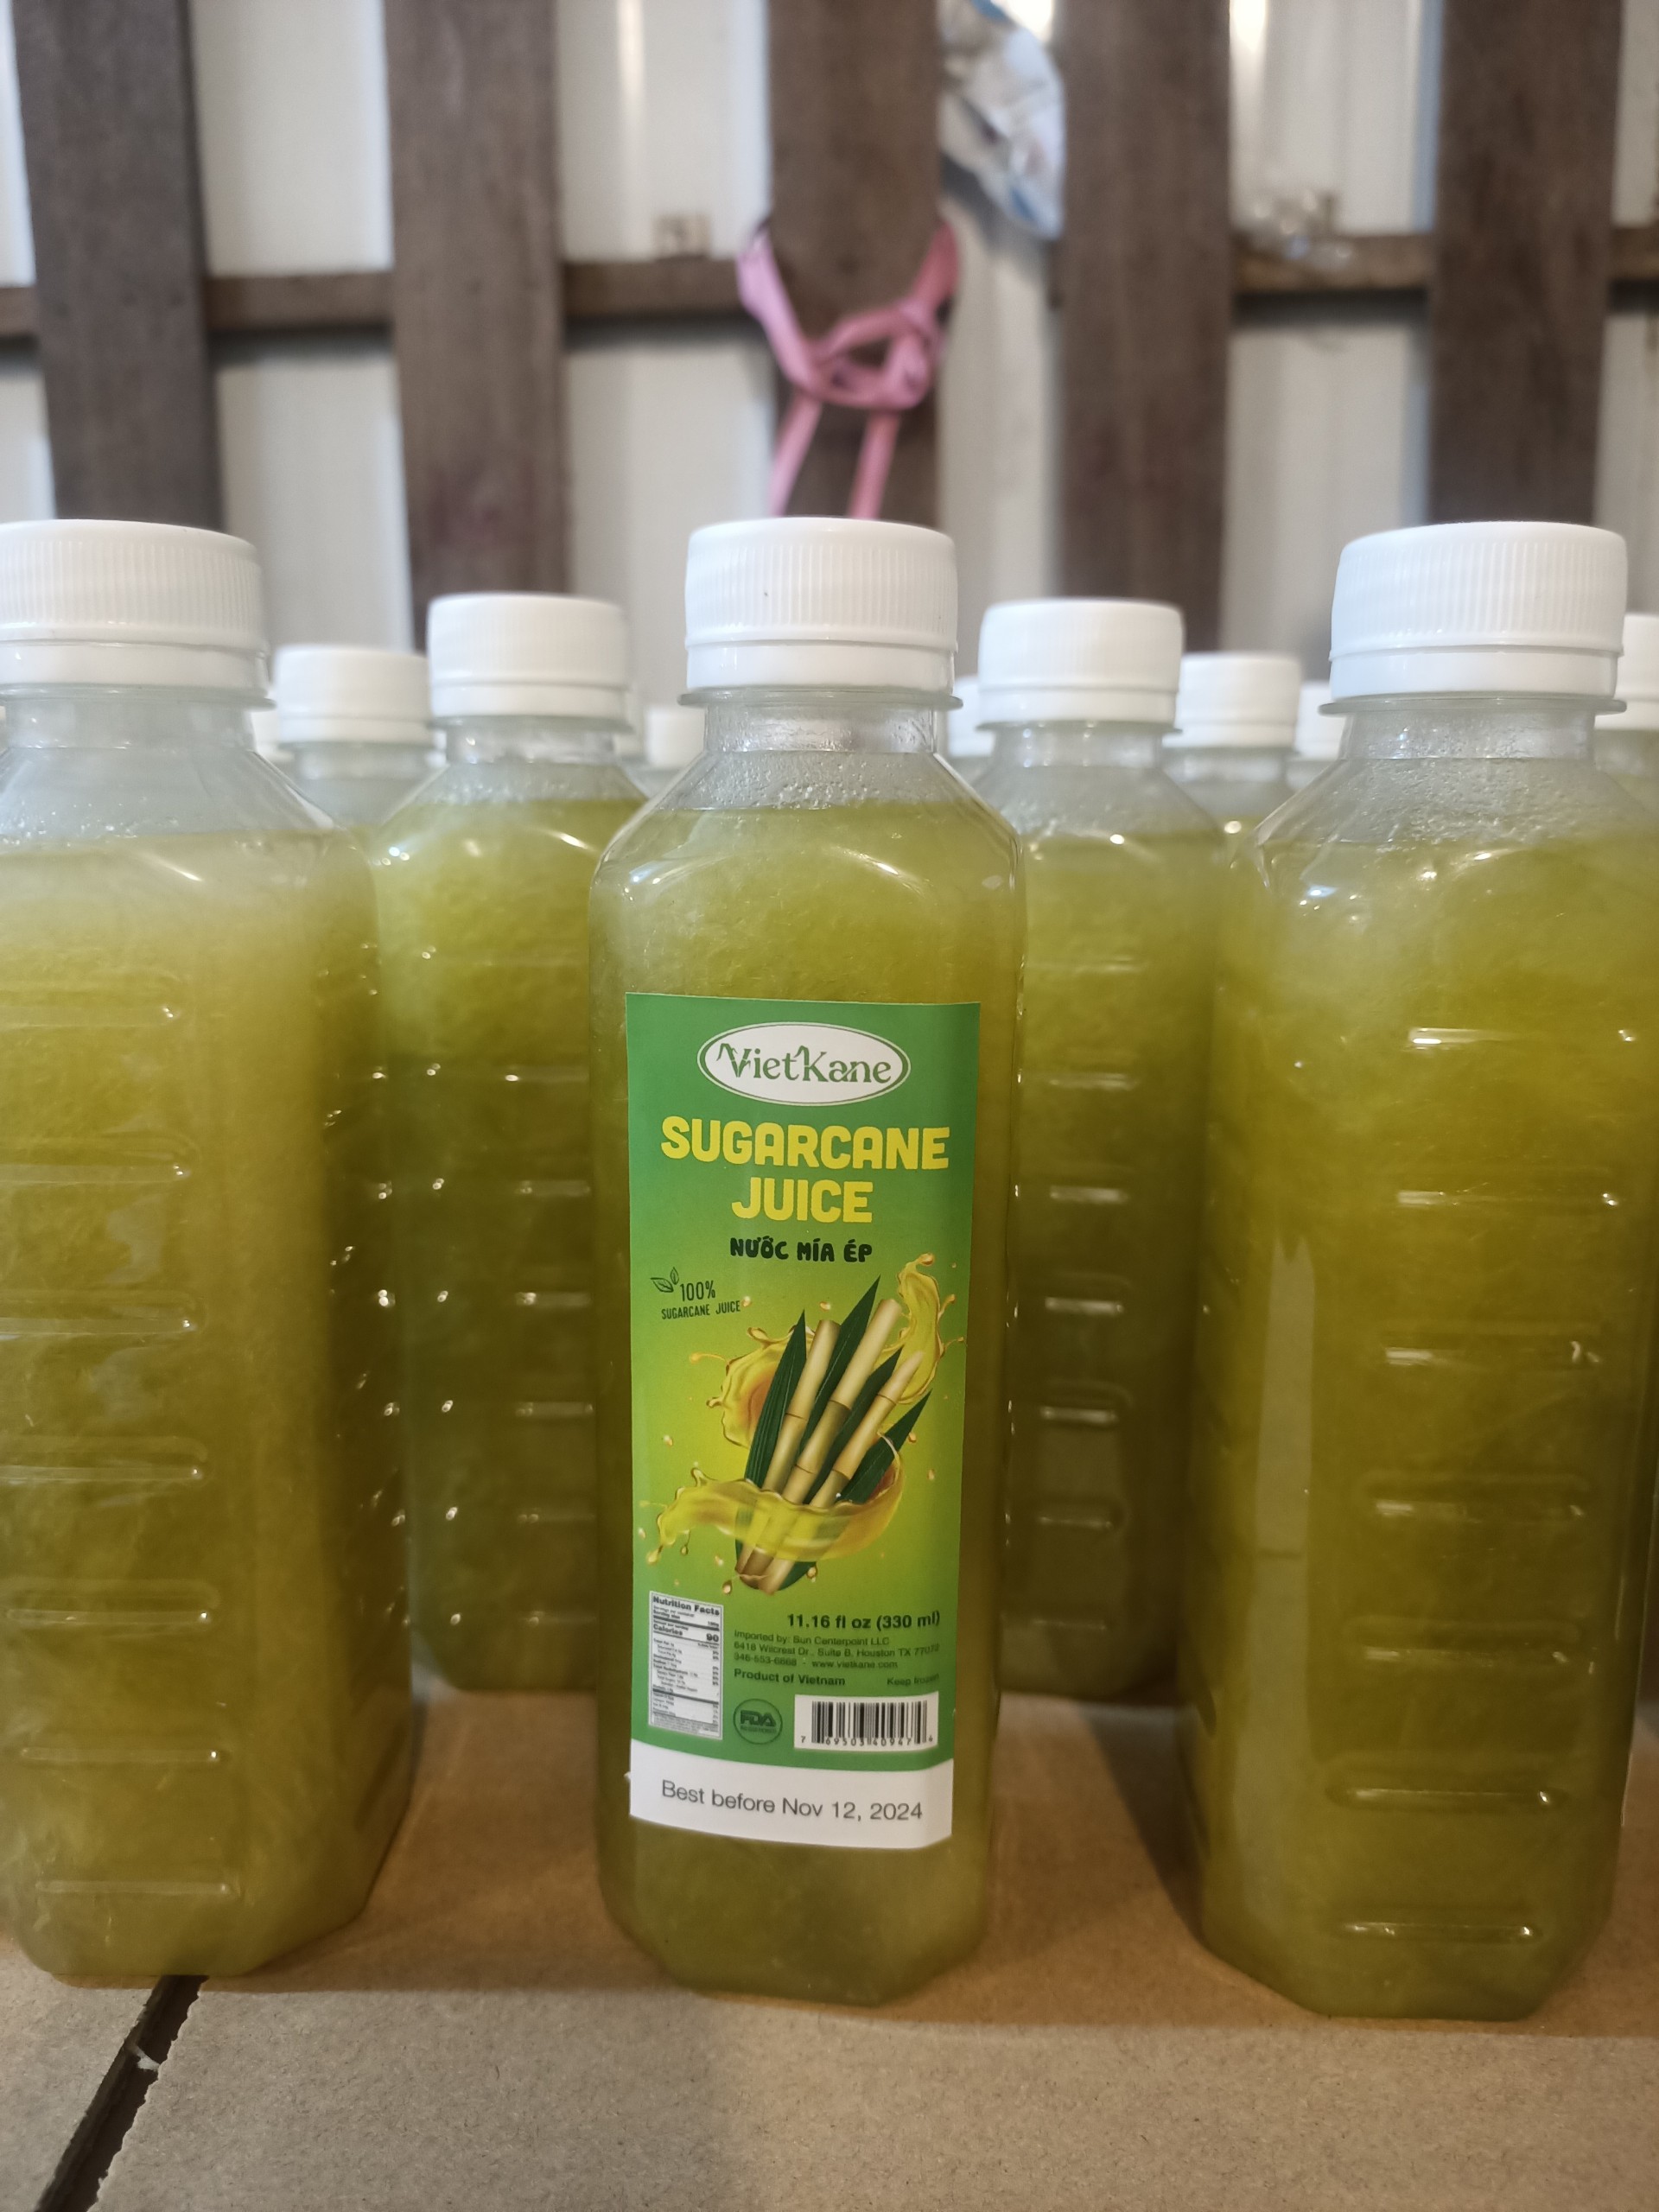 Tan Gia Thanh is a reputable unit supplying frozen prepared sugarcane juice for export in the South of Vietnam